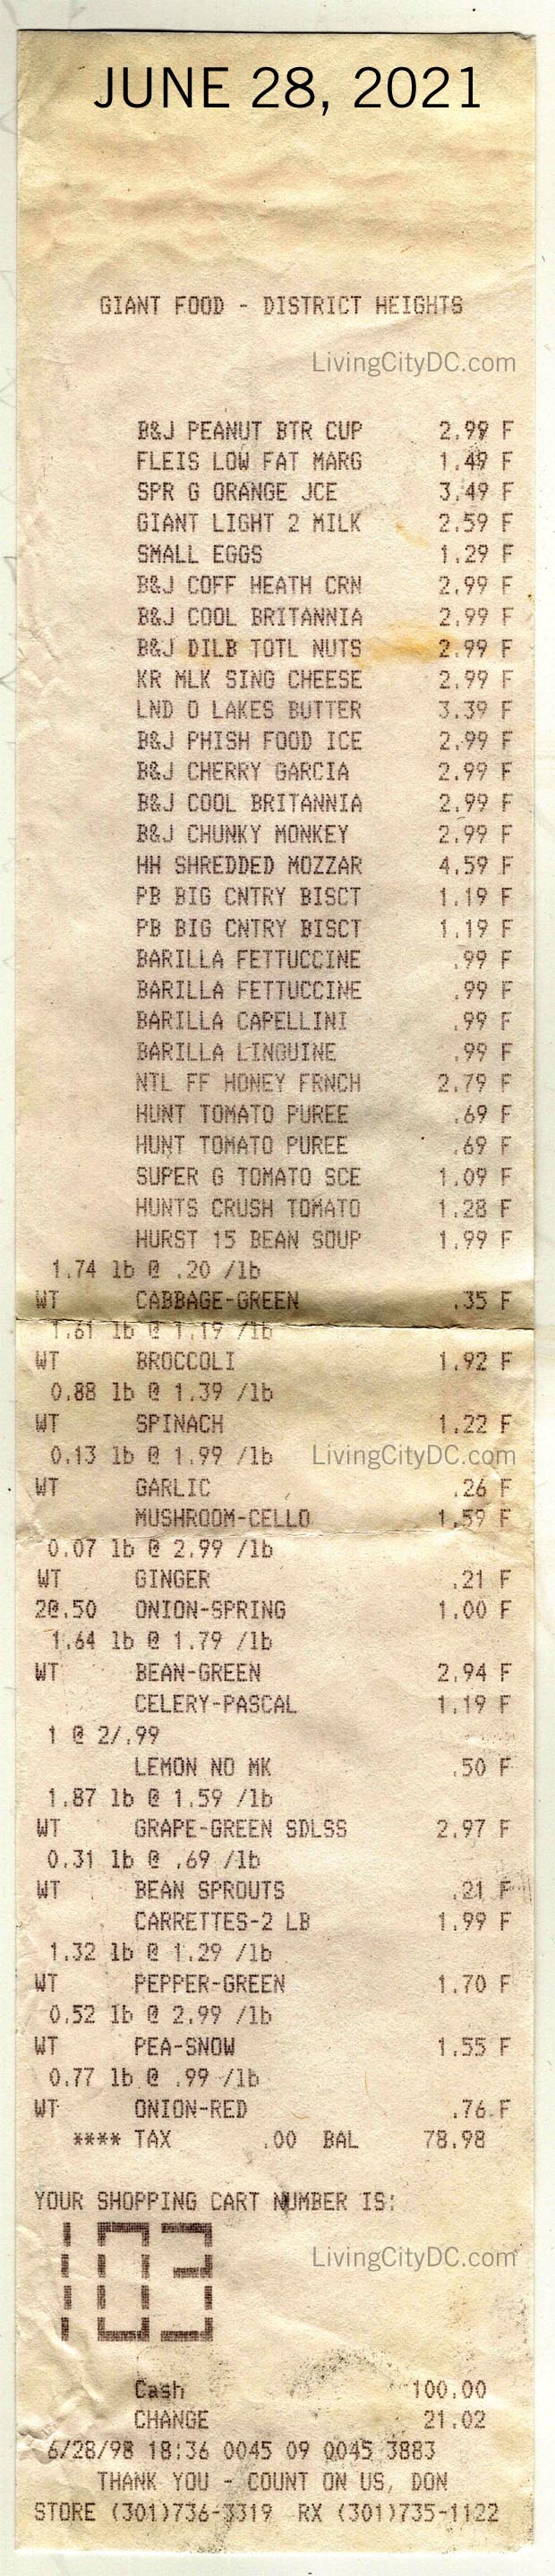 Grocery Store Receipt 1998 - Giant Food DIstrict Heights